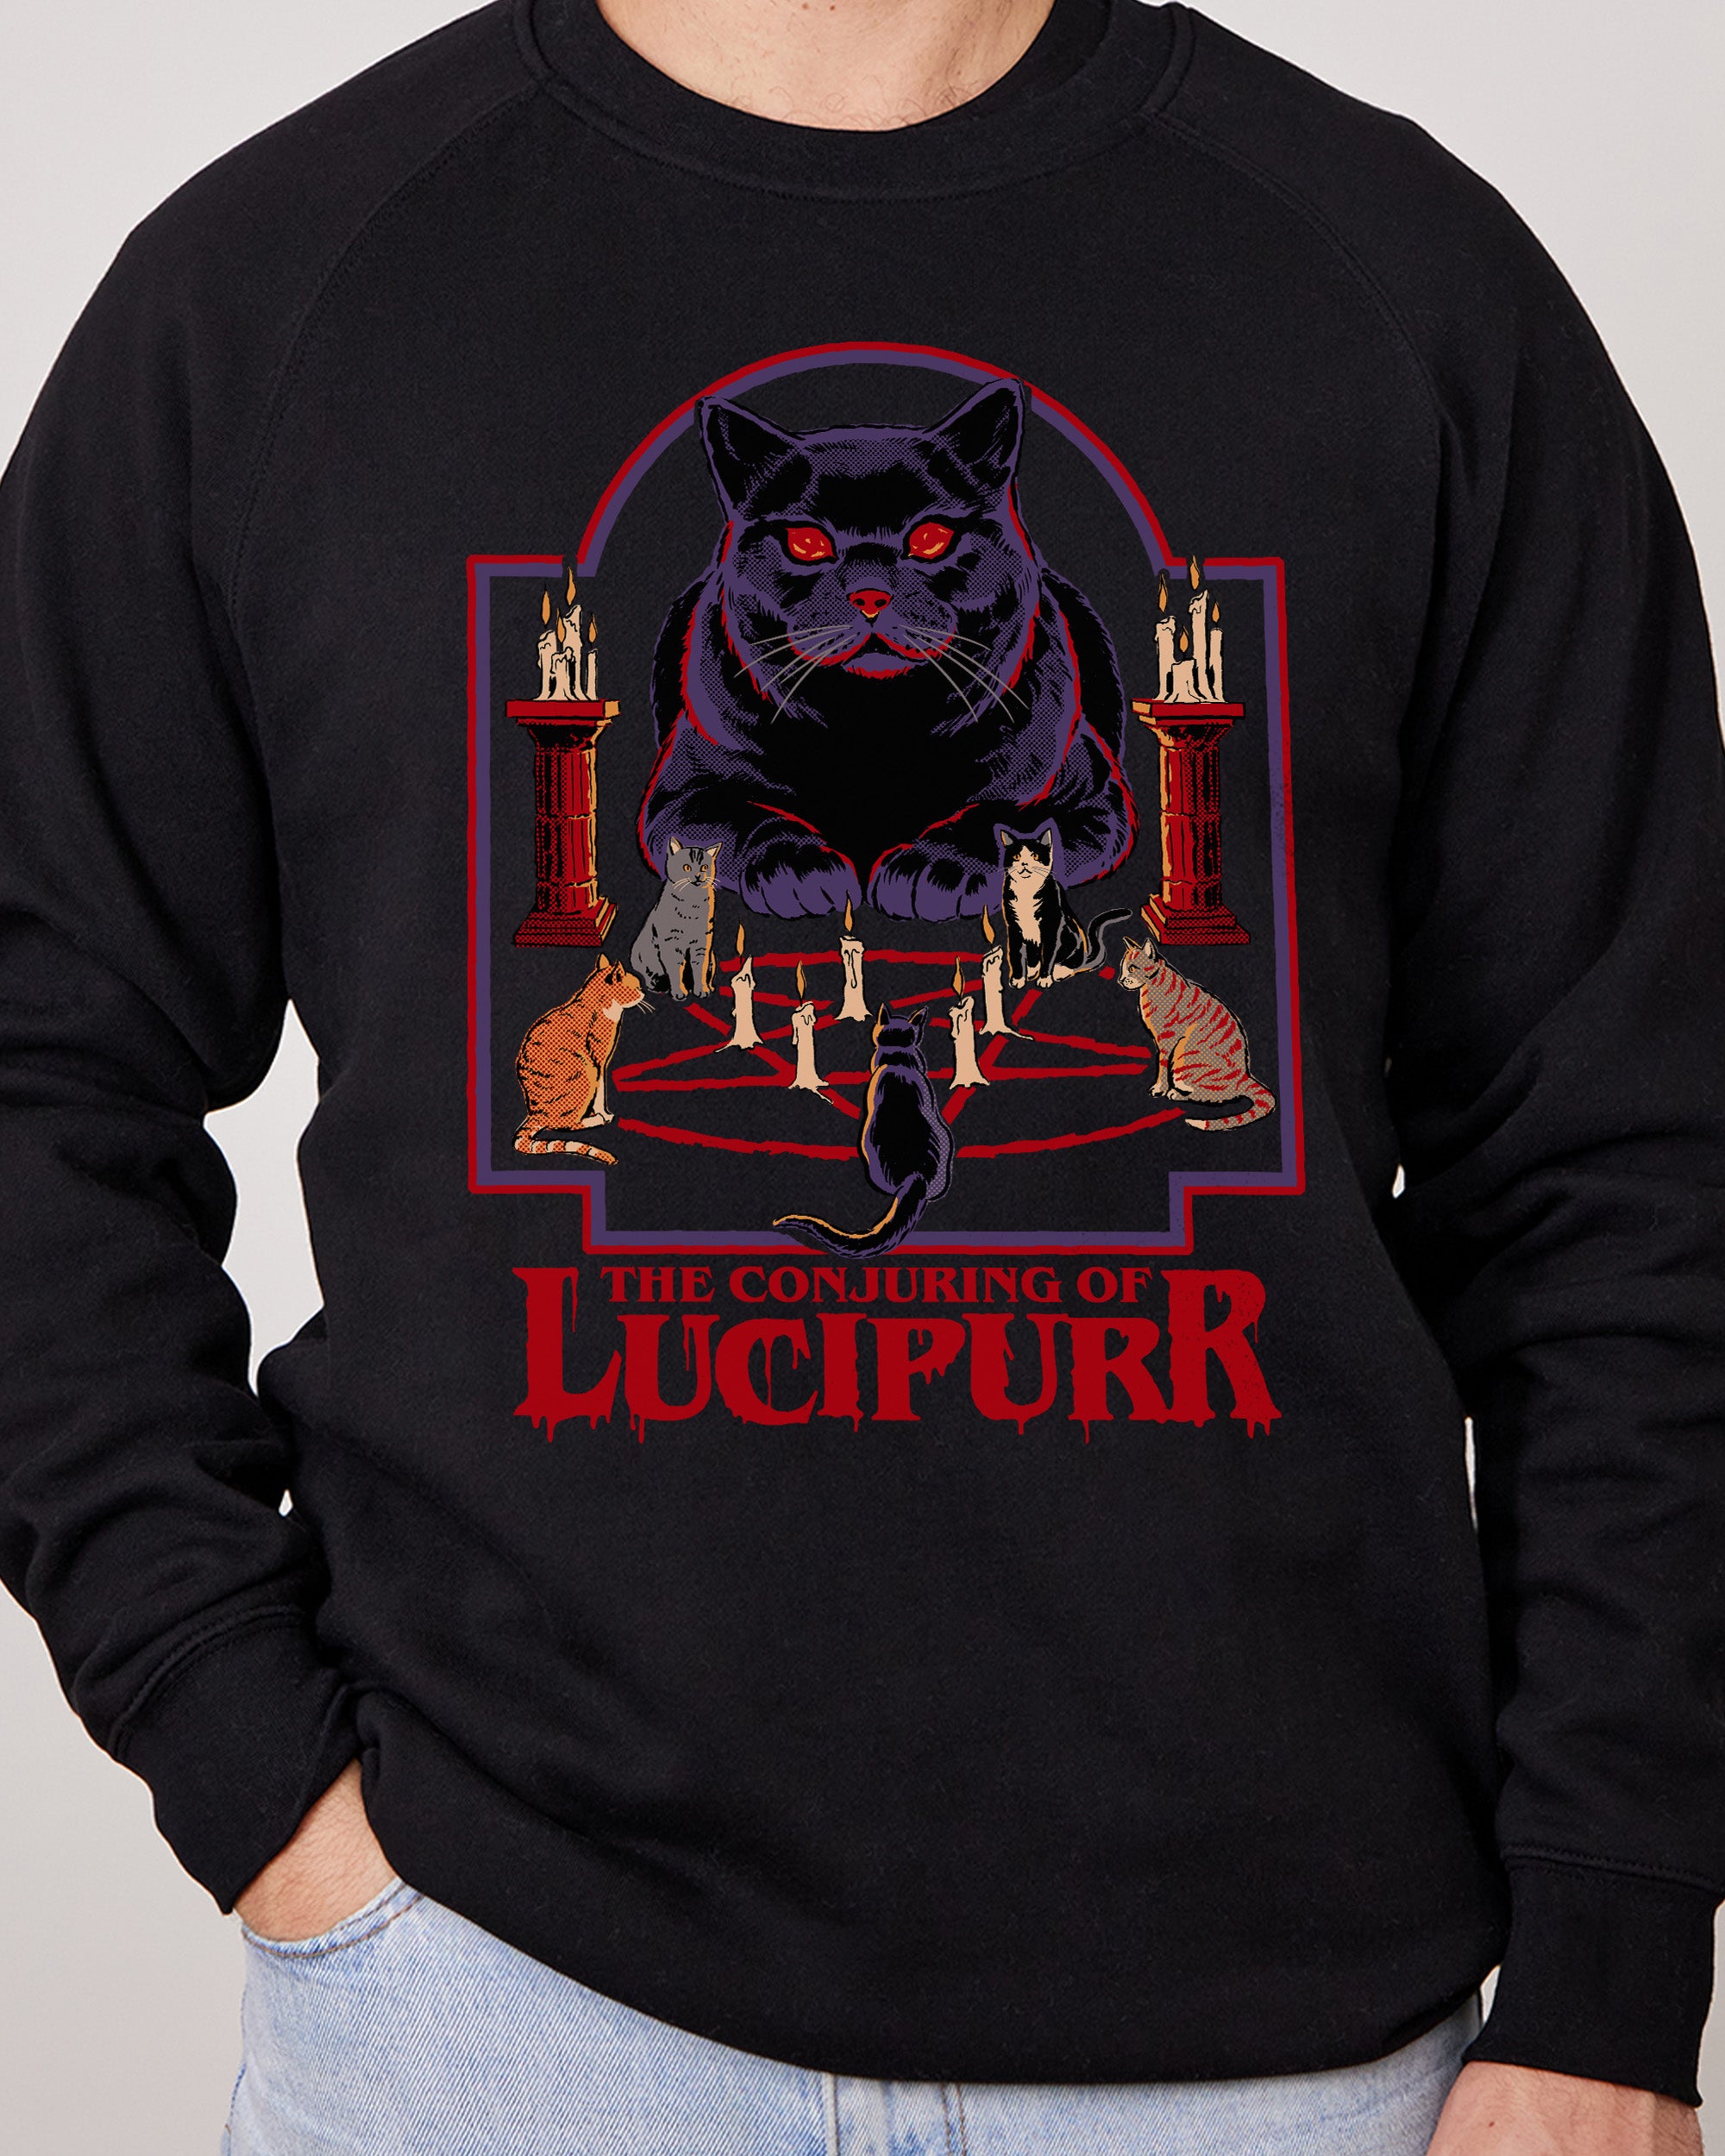 The Conjuring of Lucipurr Sweater Australia Online